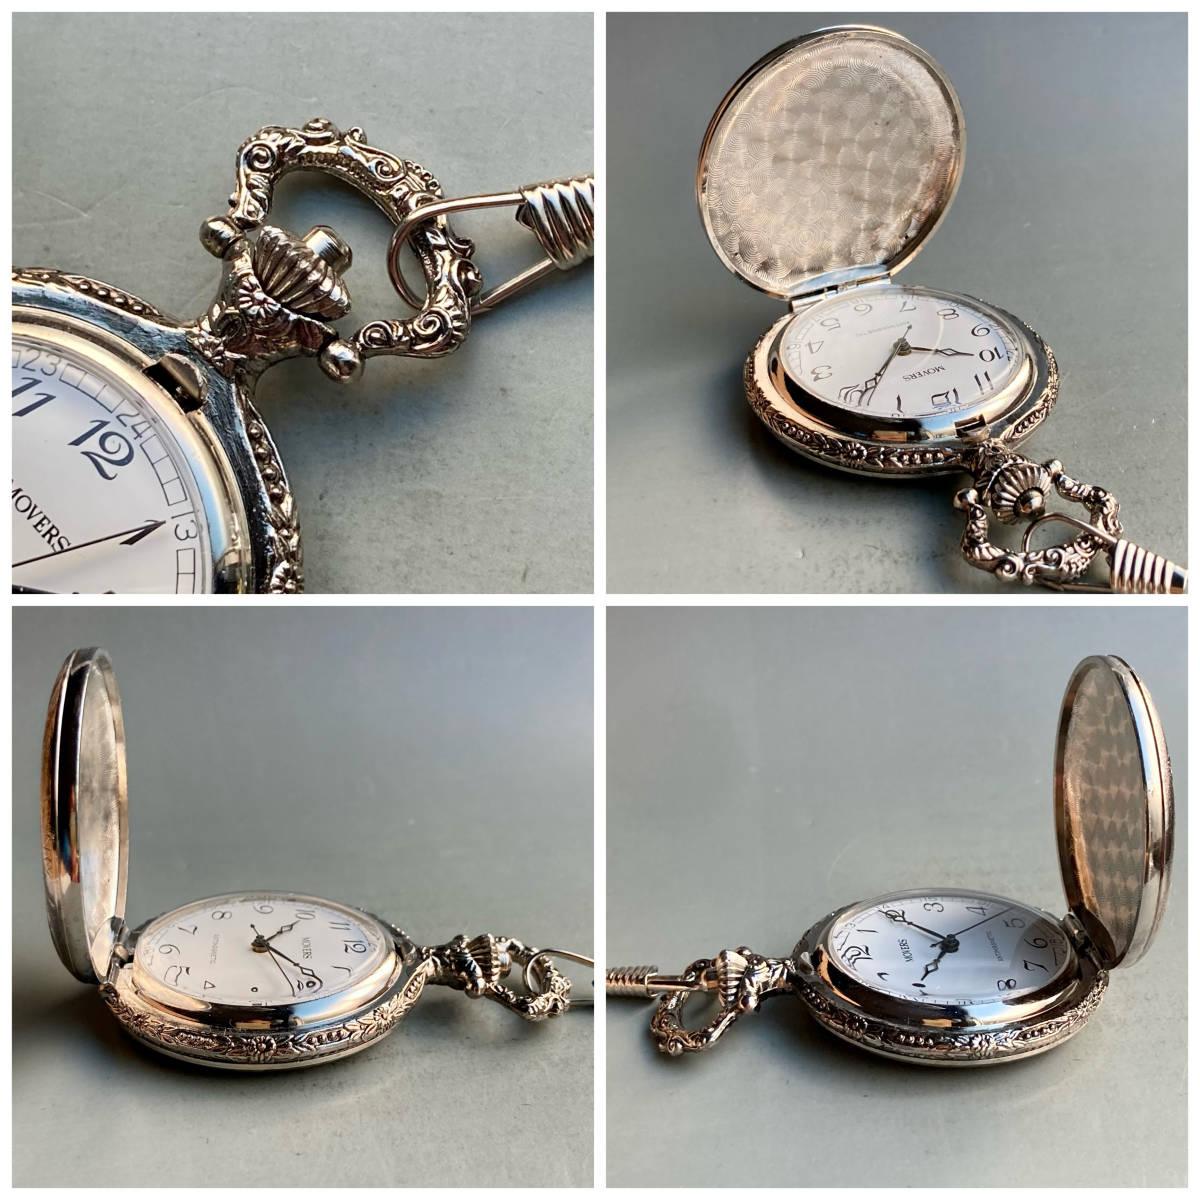 Antique Pocket Watch Movers Manual Winding 46mm Vintage Watch Hunter Case - Murphy Johnson Watches Co.